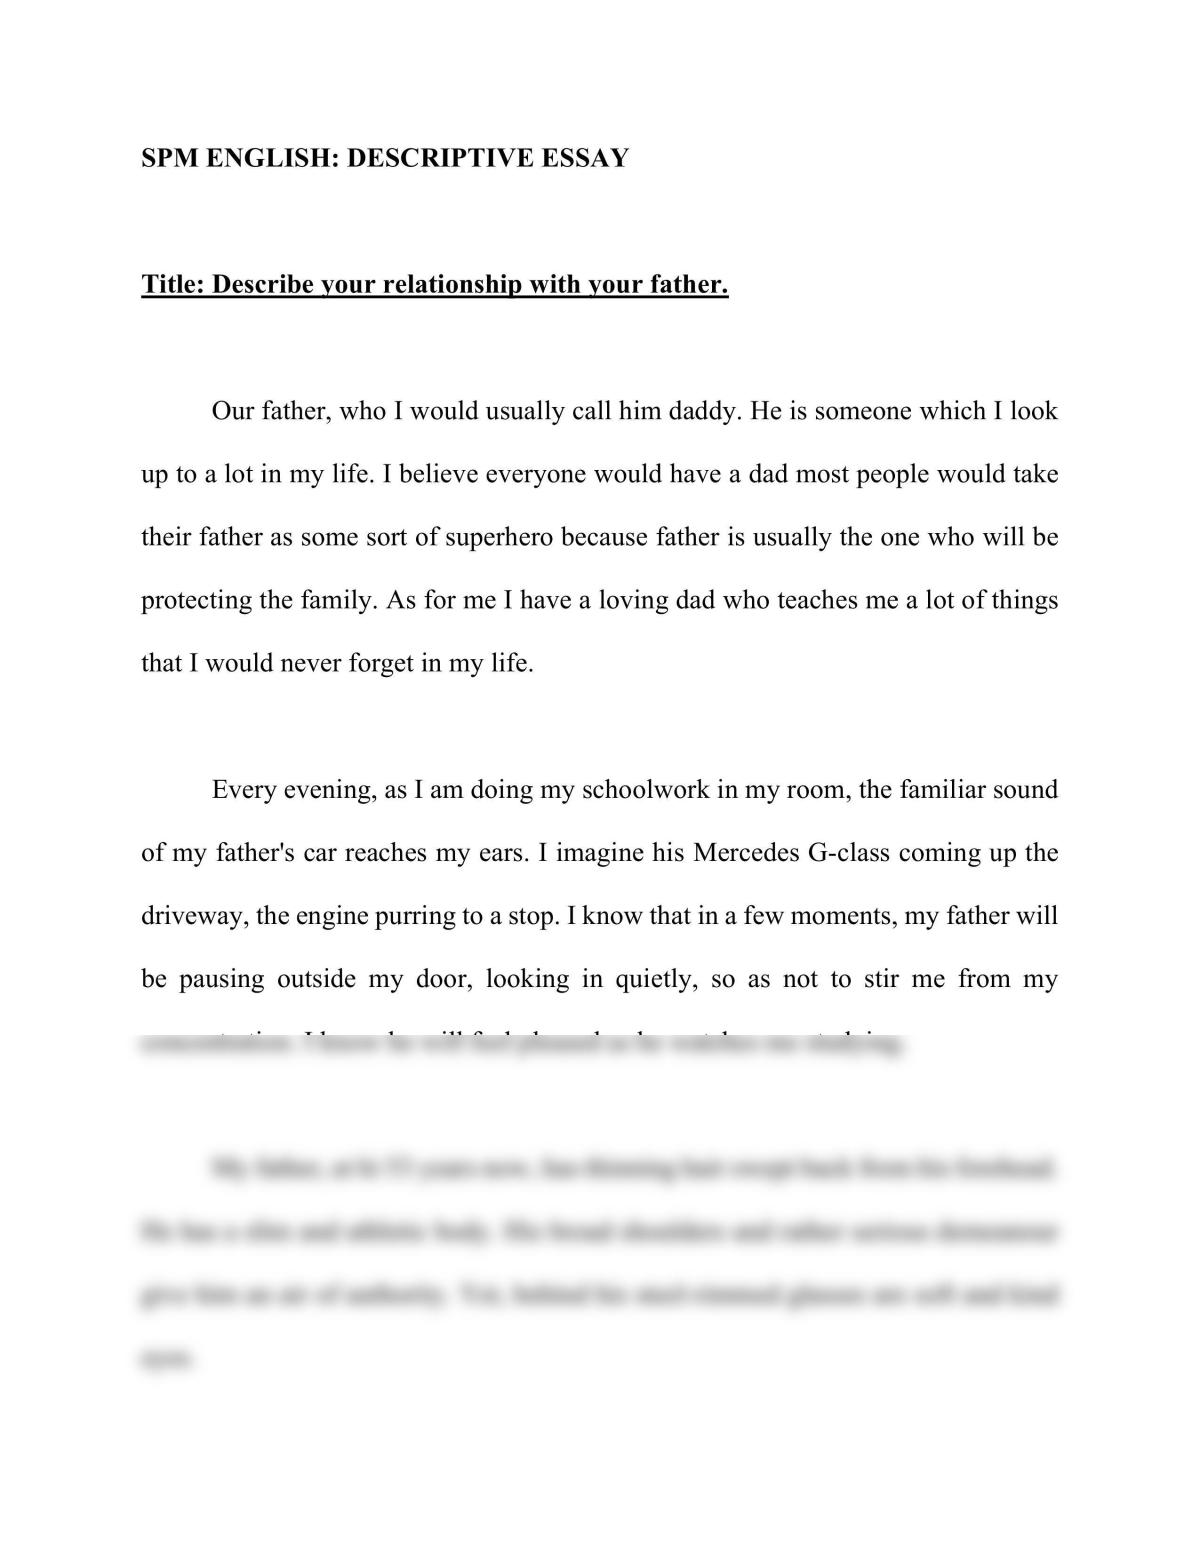 describe your relationship with your father essay